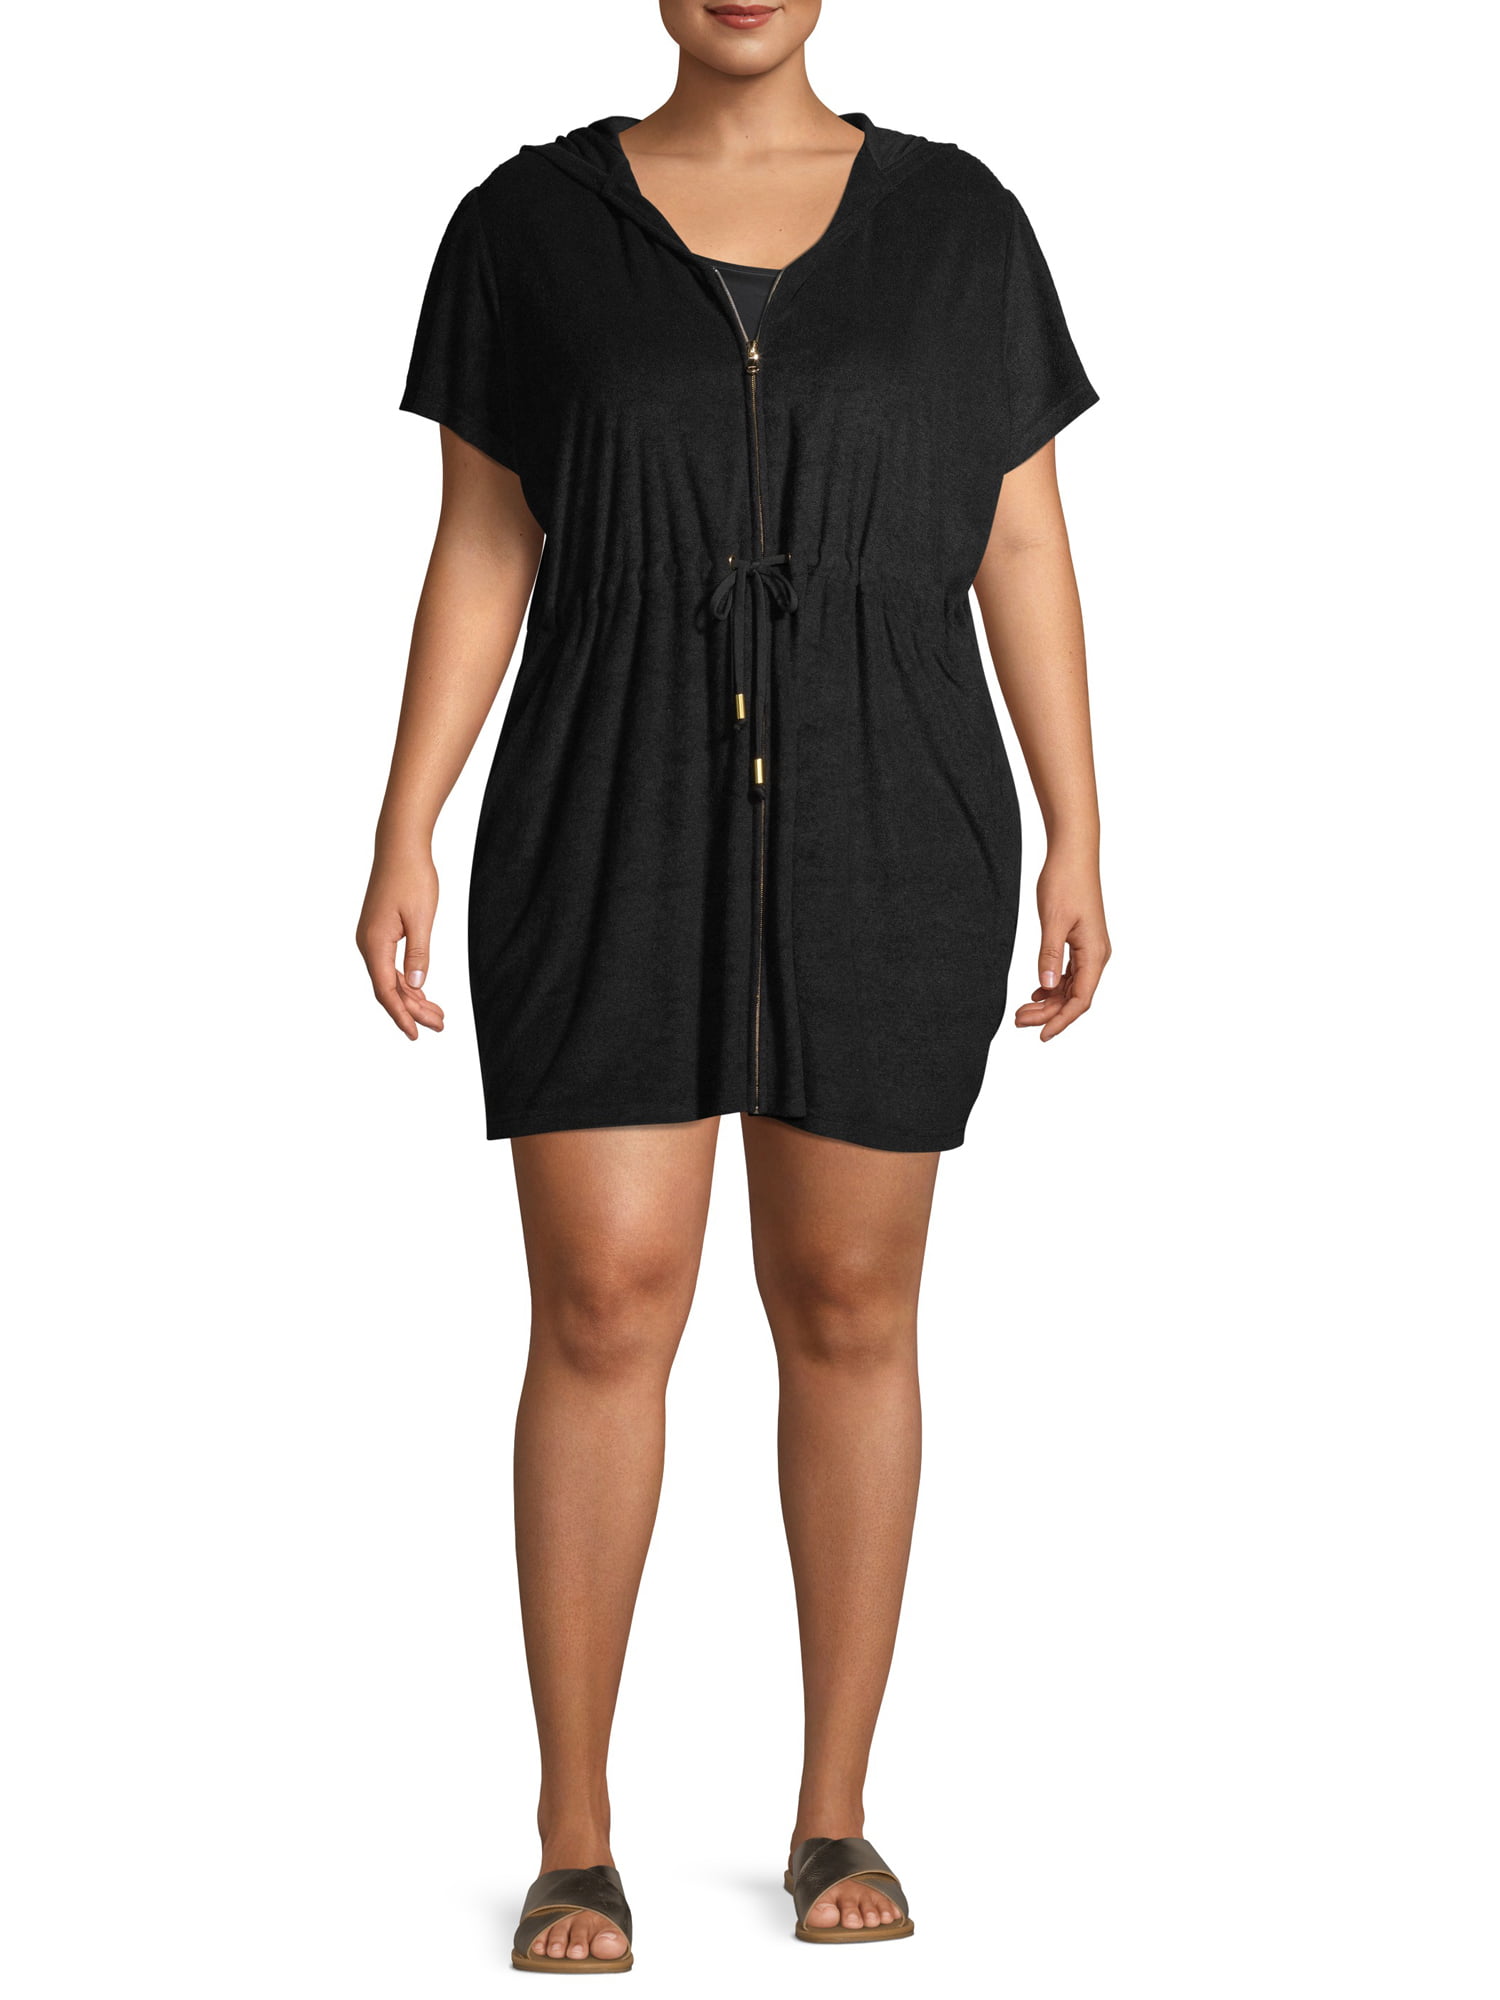 Plus Size Terry Cloth Swimsuit Cover UPS | Dresses Images 2022